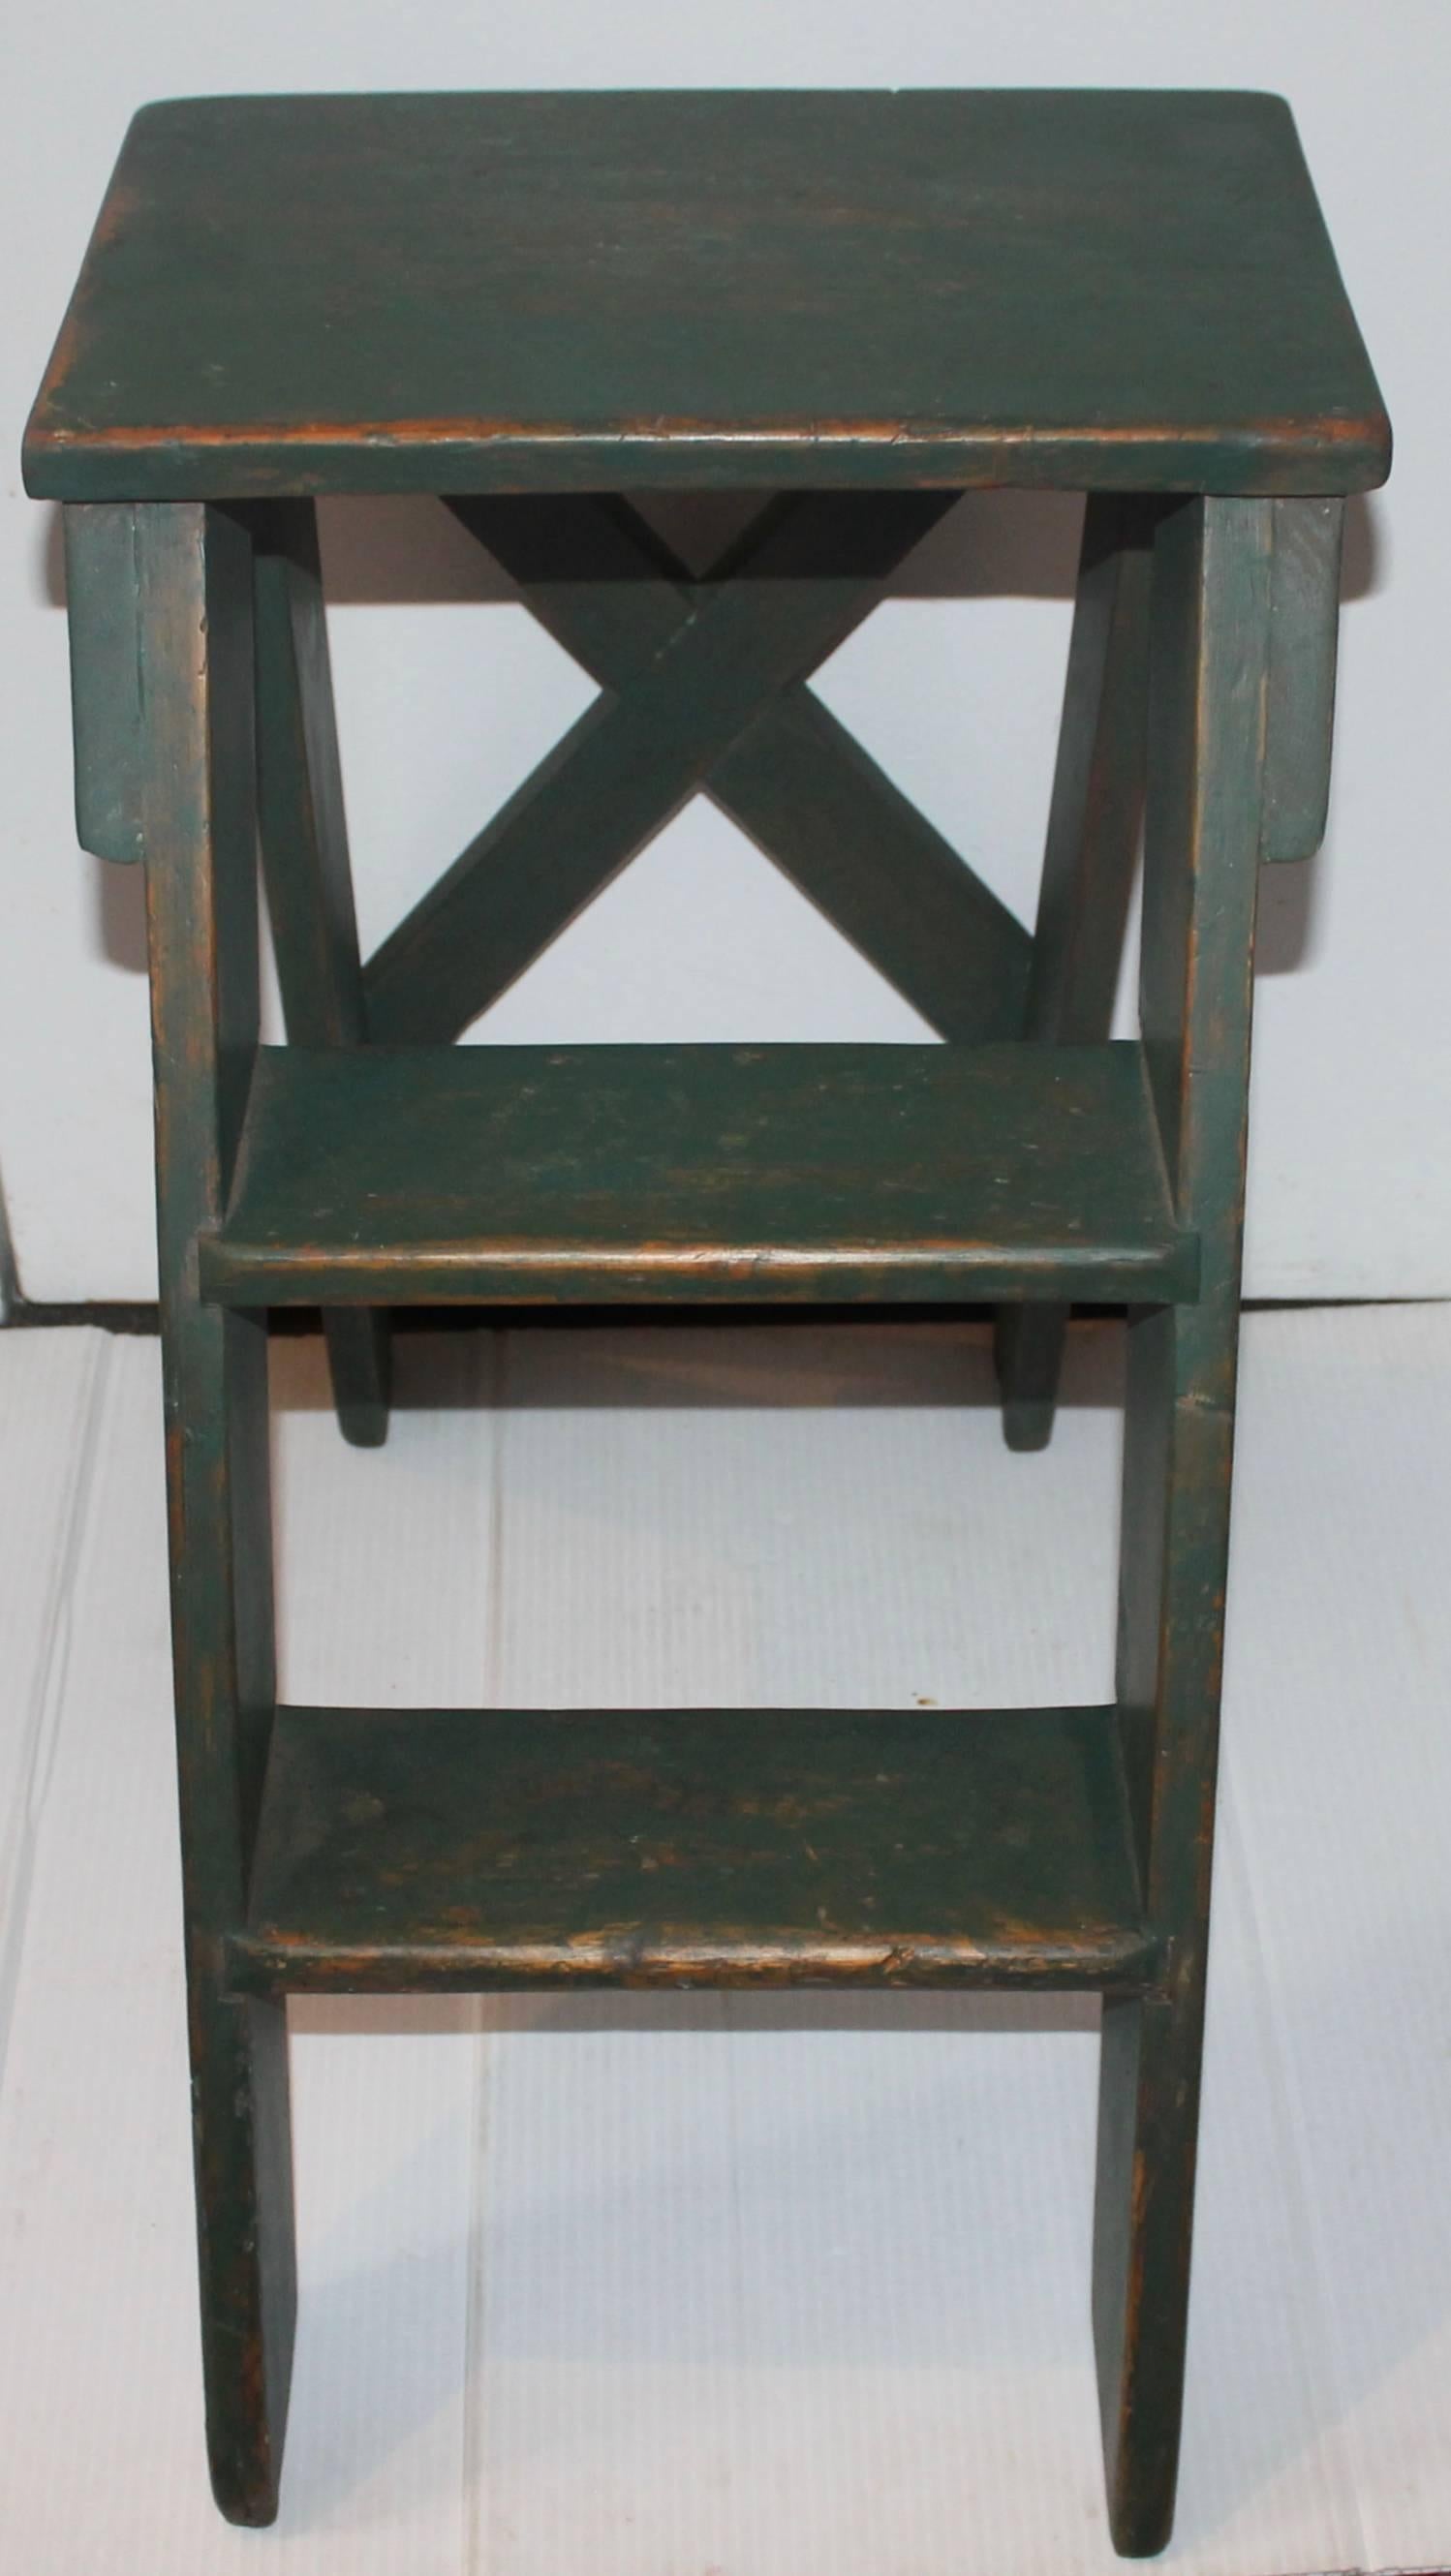 This original green painted 19th century step ladder is a stationary step ladder from New England. The condition is very strong and sturdy. The surface is worn but a wonderful patina.